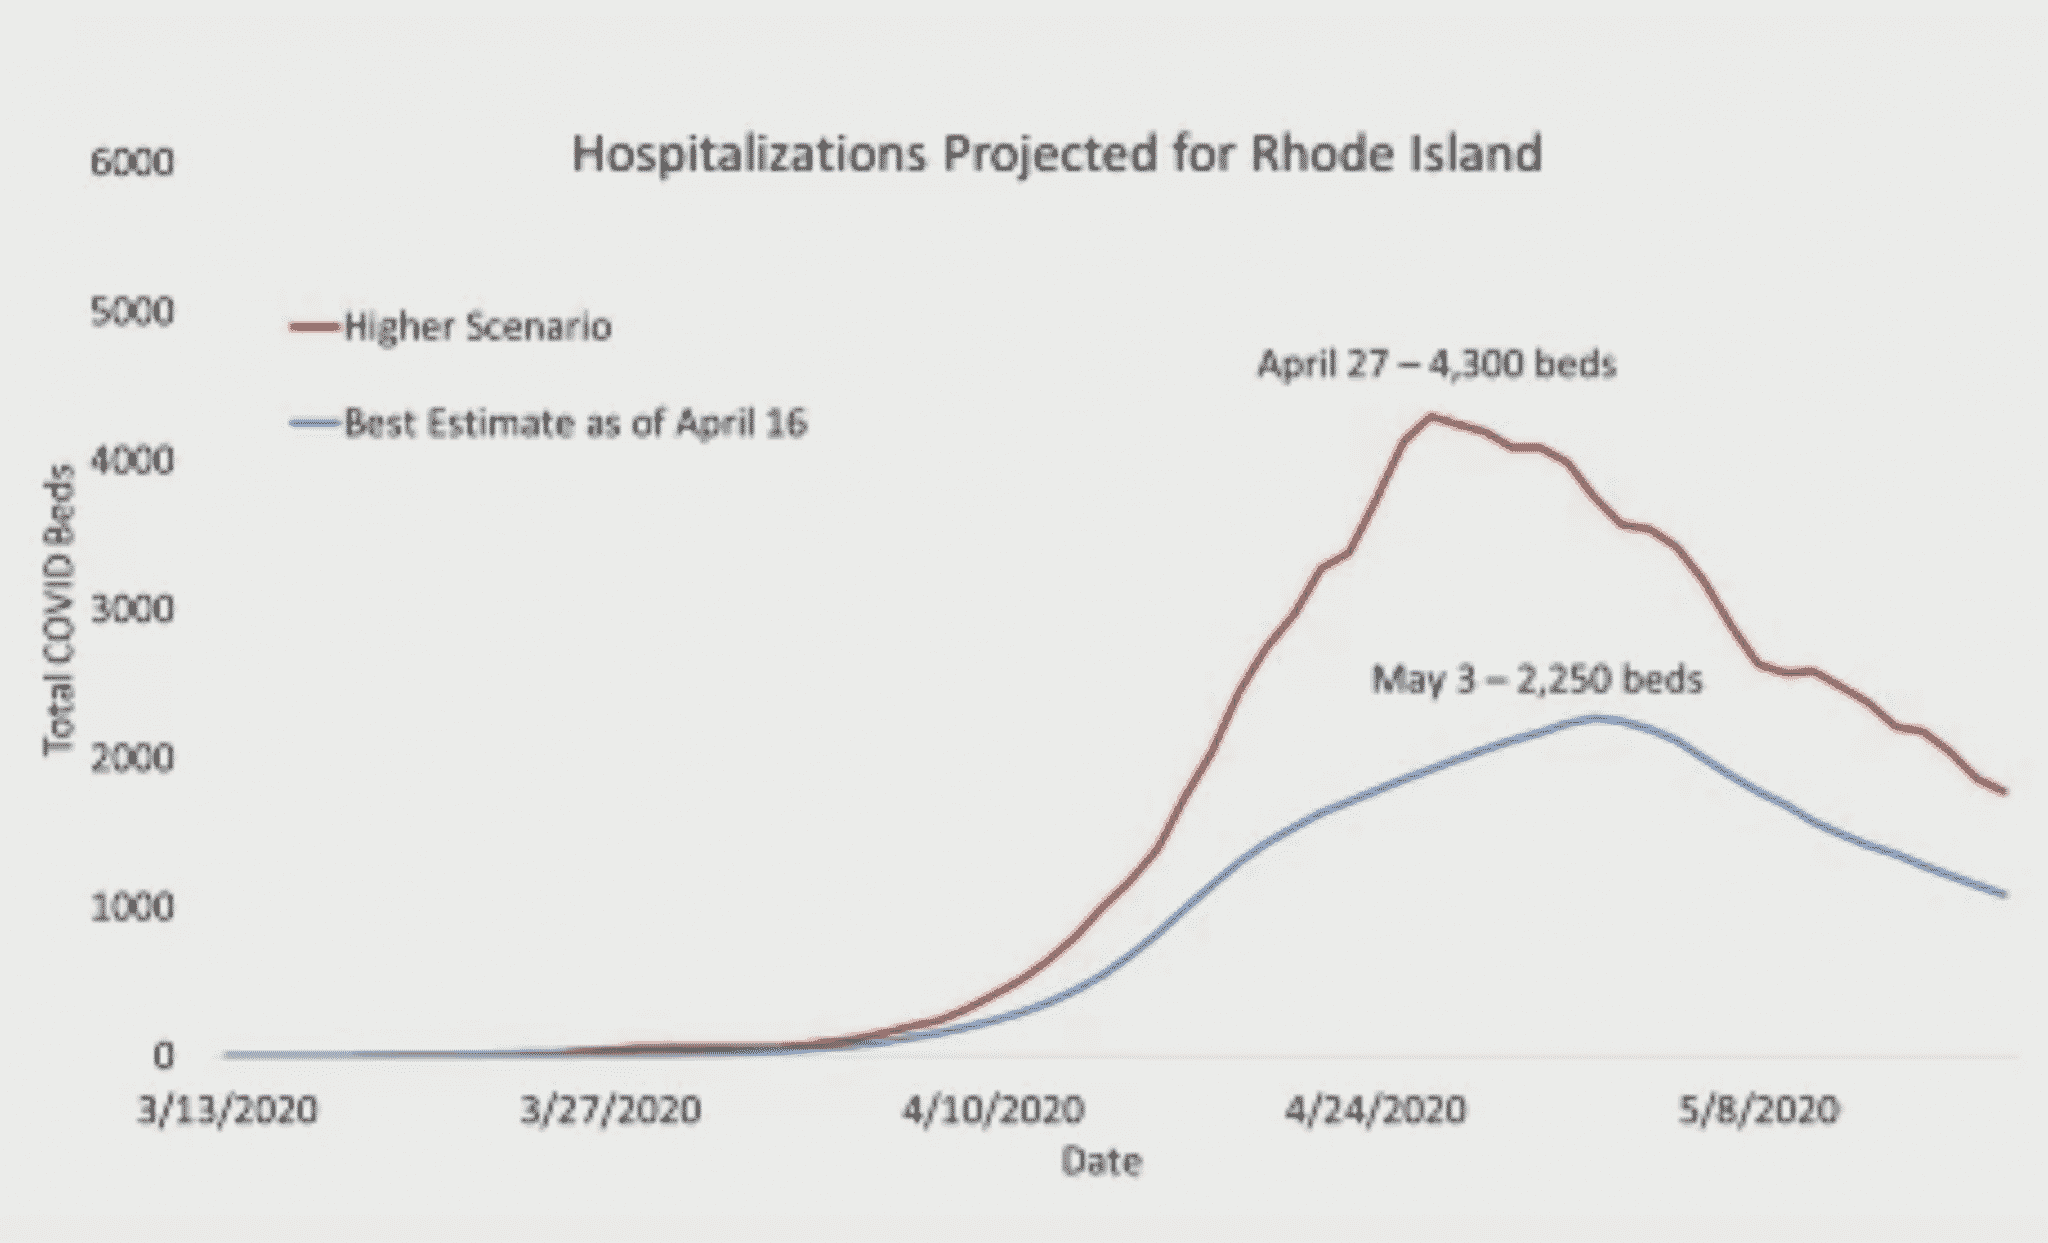 [CREDIT: RIDOH] A graph shows the number of hospital beds predicted in blue with social distancing adherence, and in red without social distancing adherence.